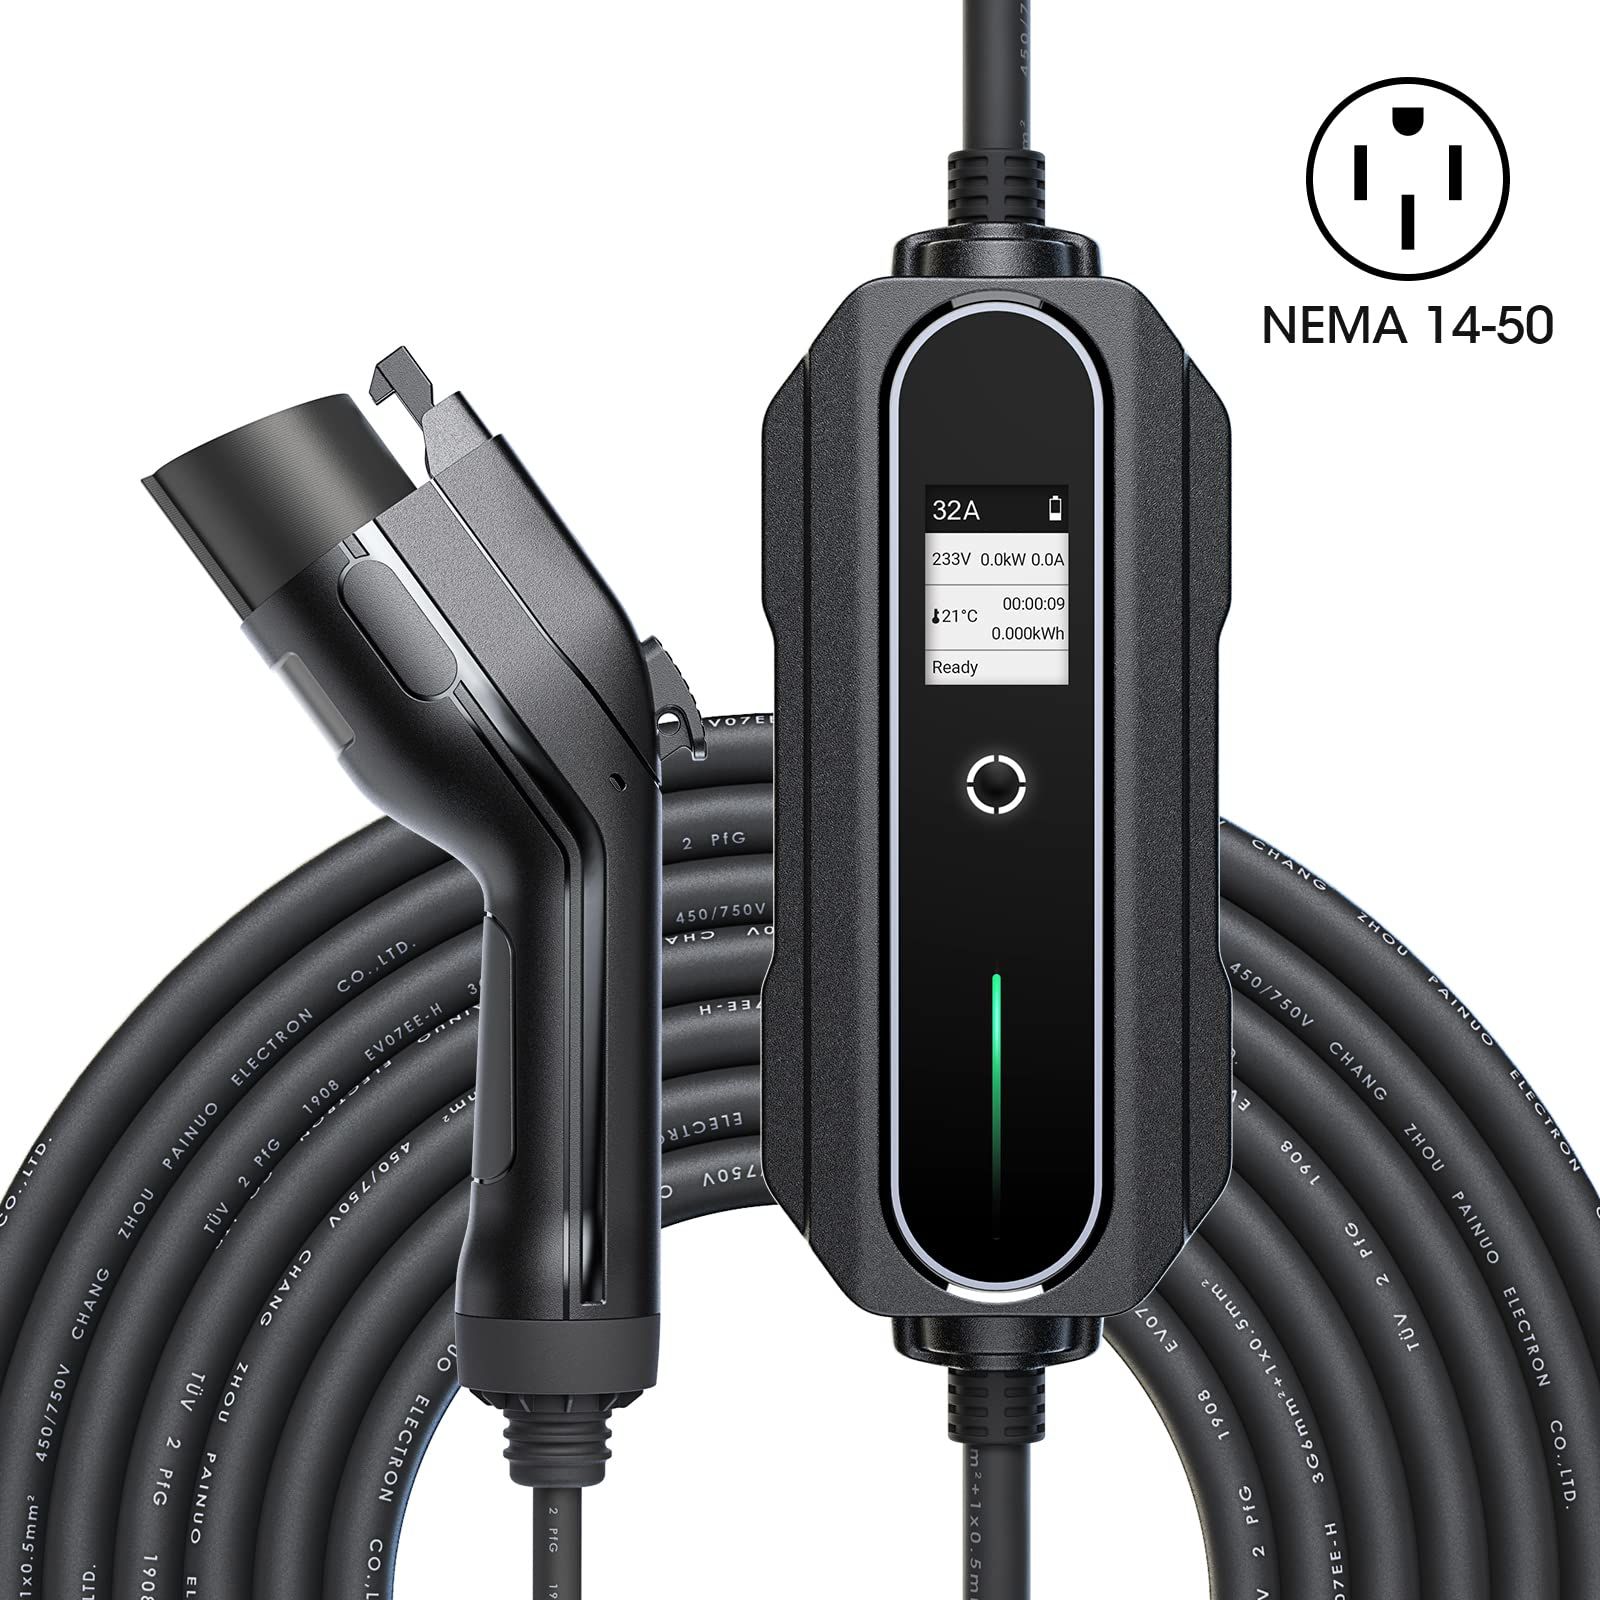 5M Charging Cable Type 2 Single Phase £139